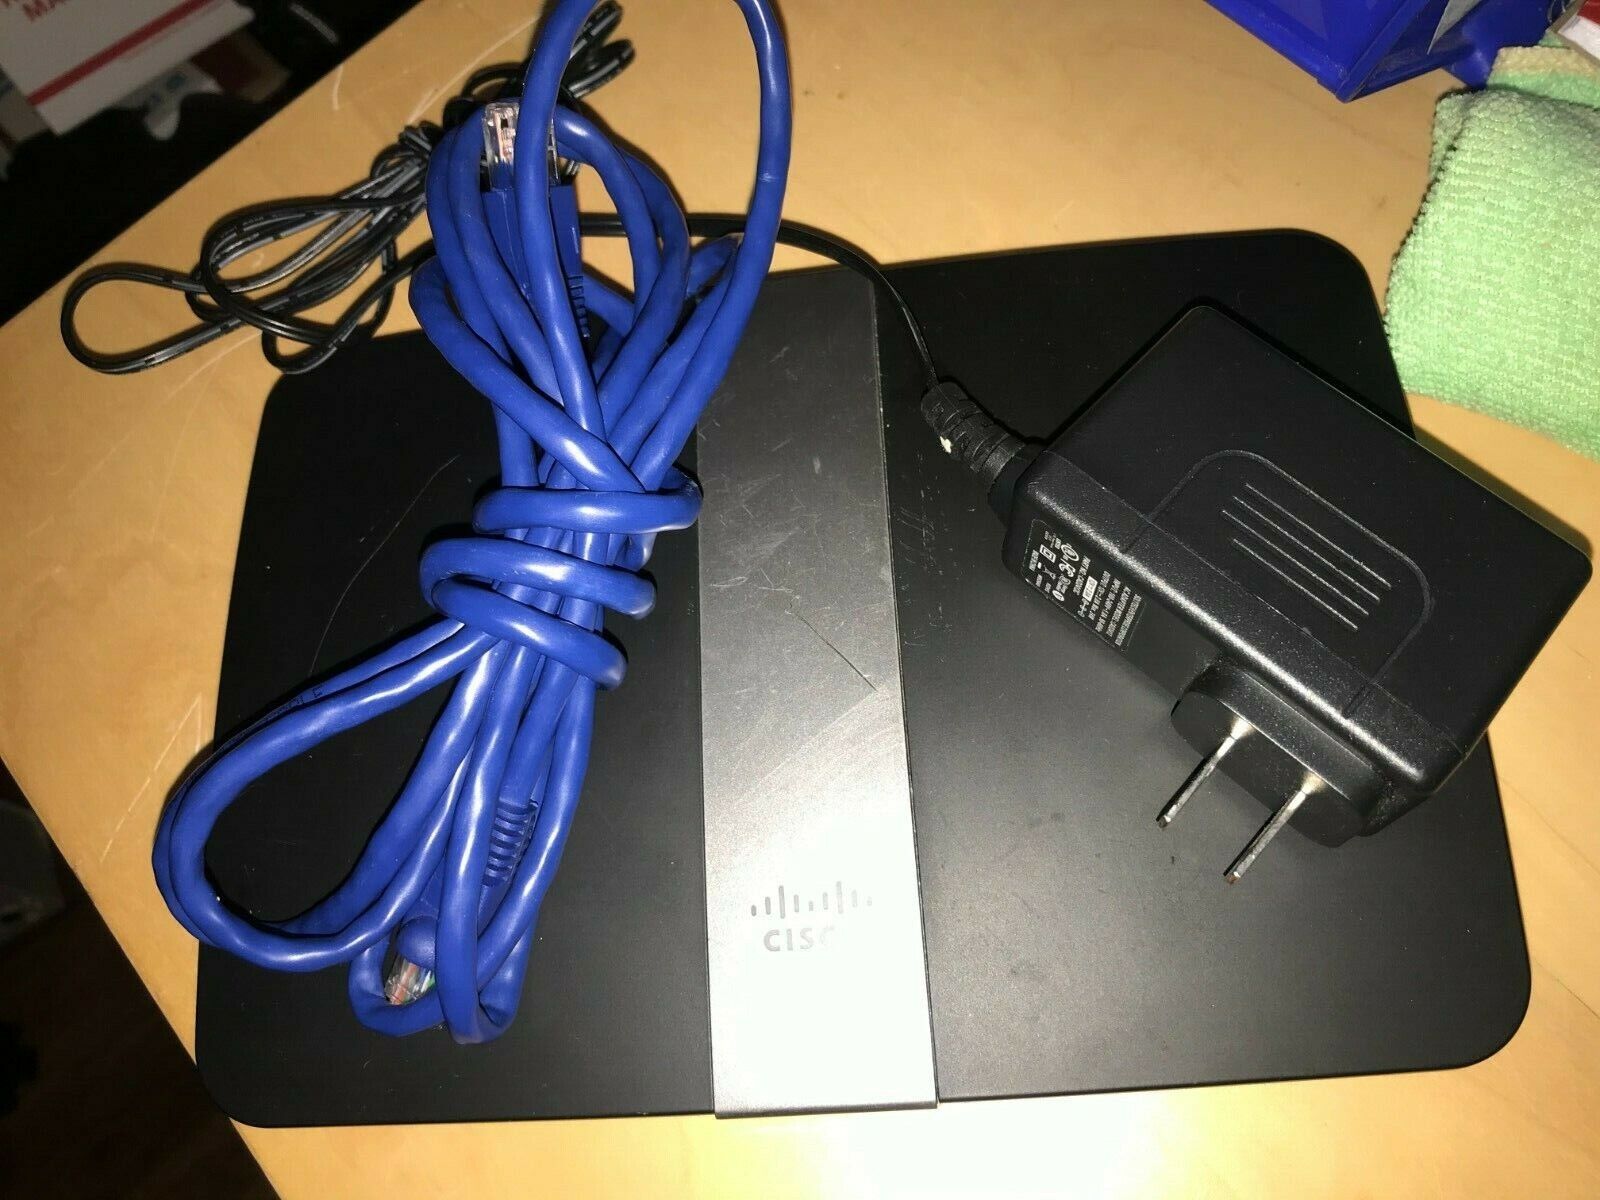 USED- Cisco LINKSYS EA4500 N900 DUAL-BAND WI-FI ROUTER 